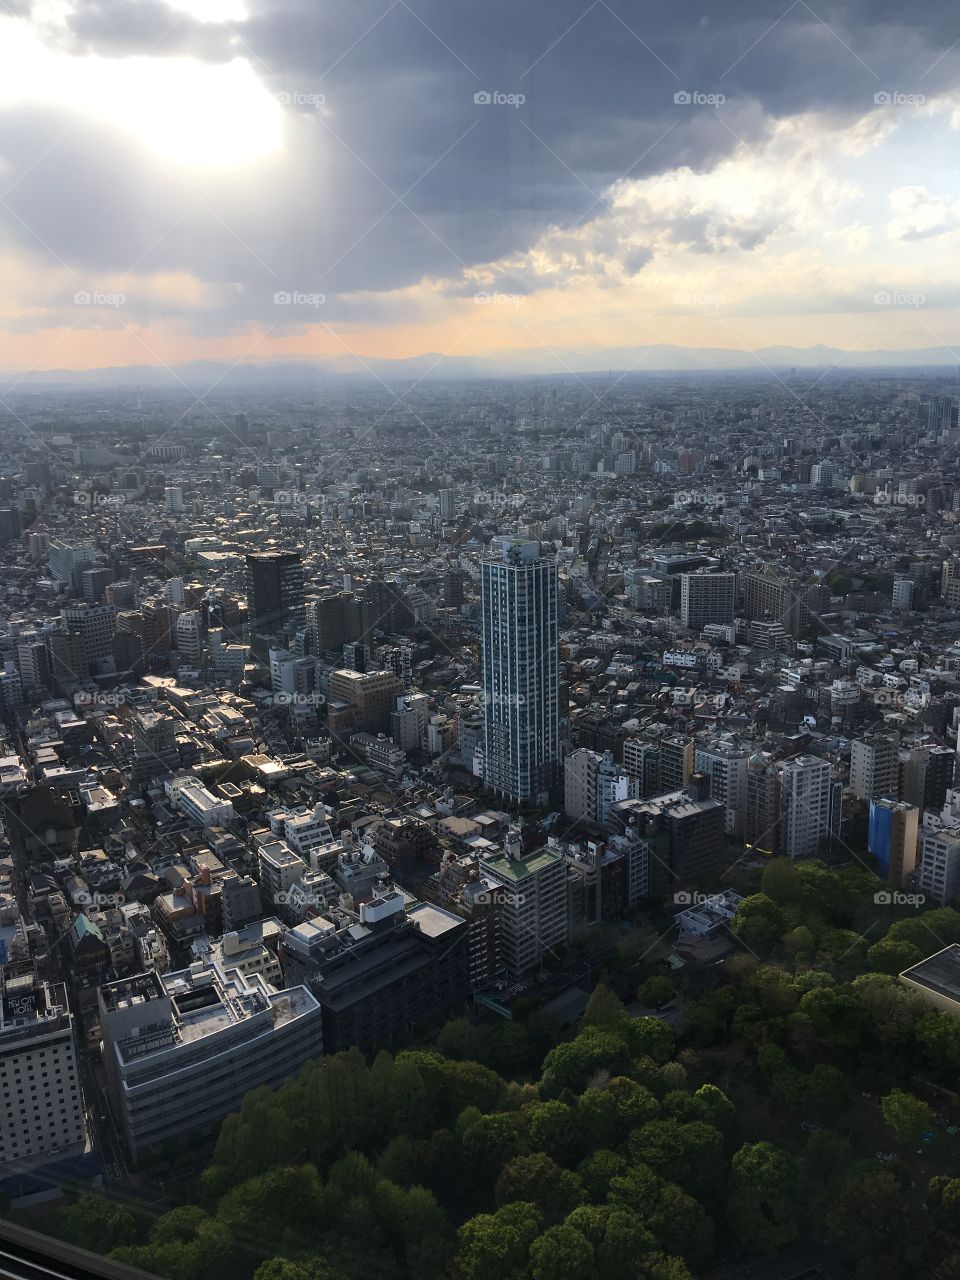 Nice view from Tokyo Metropolitan Government Building Observatories